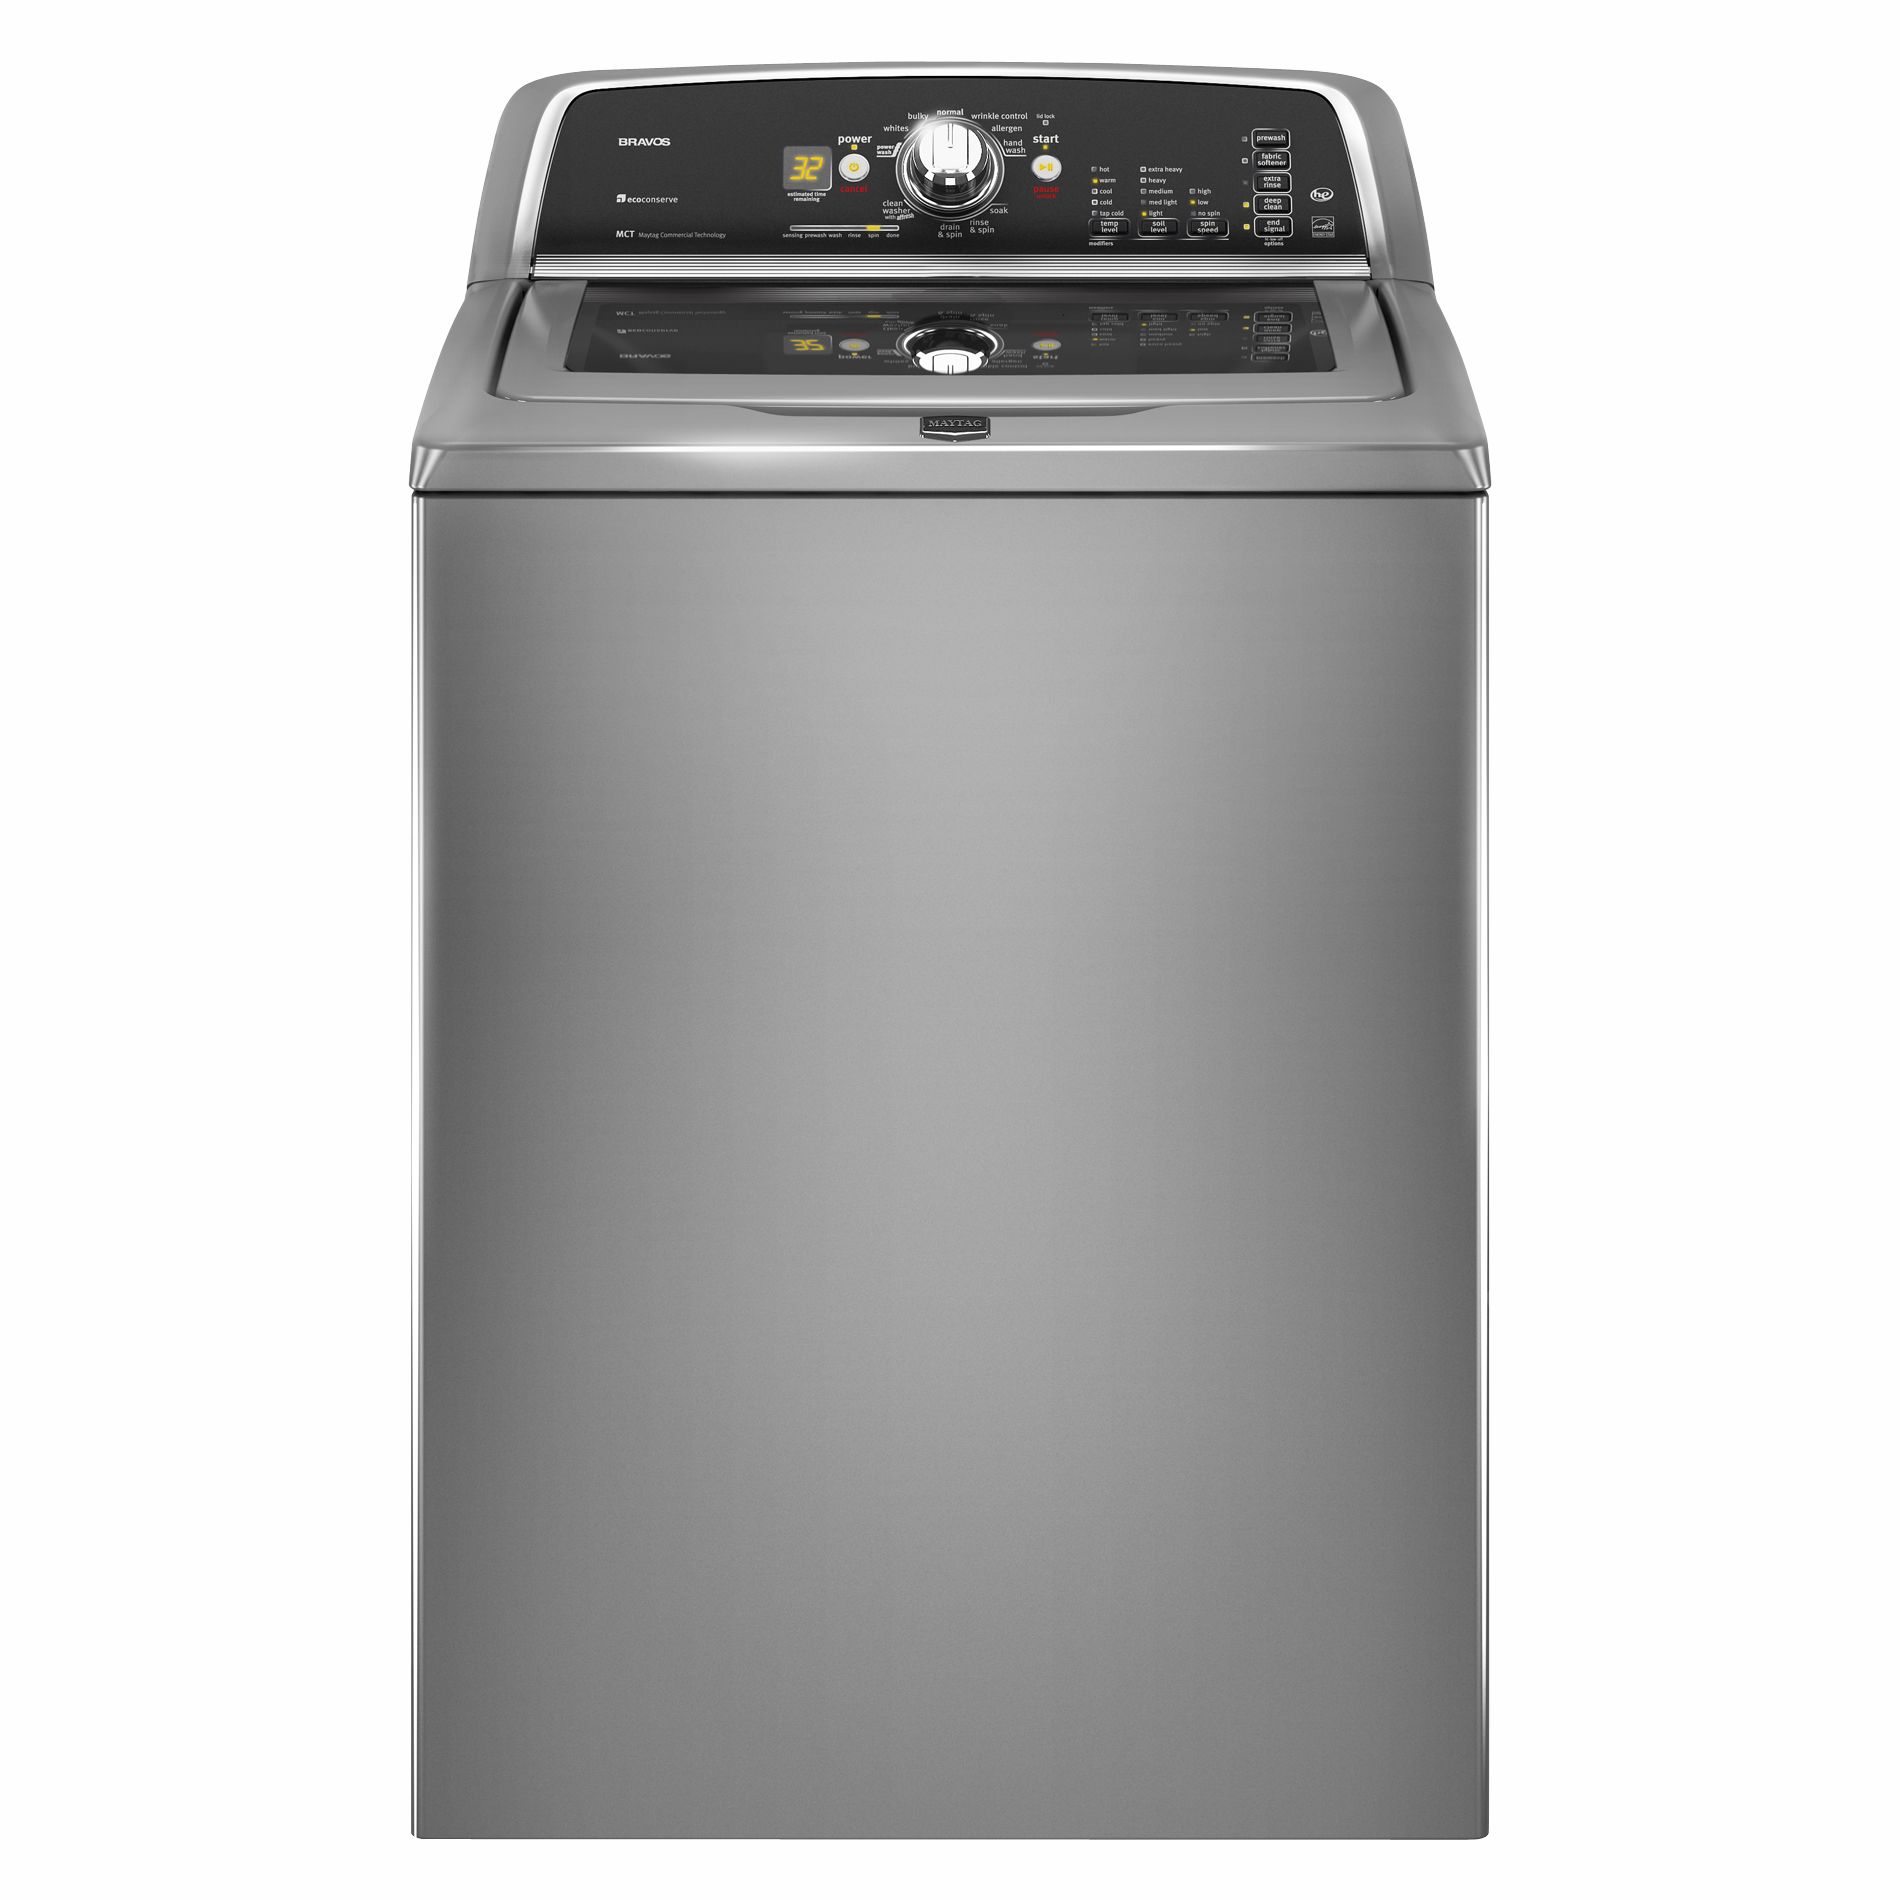 Maytag 3.6 cu. ft. Capacity Top-Load High-Efficiency Washer